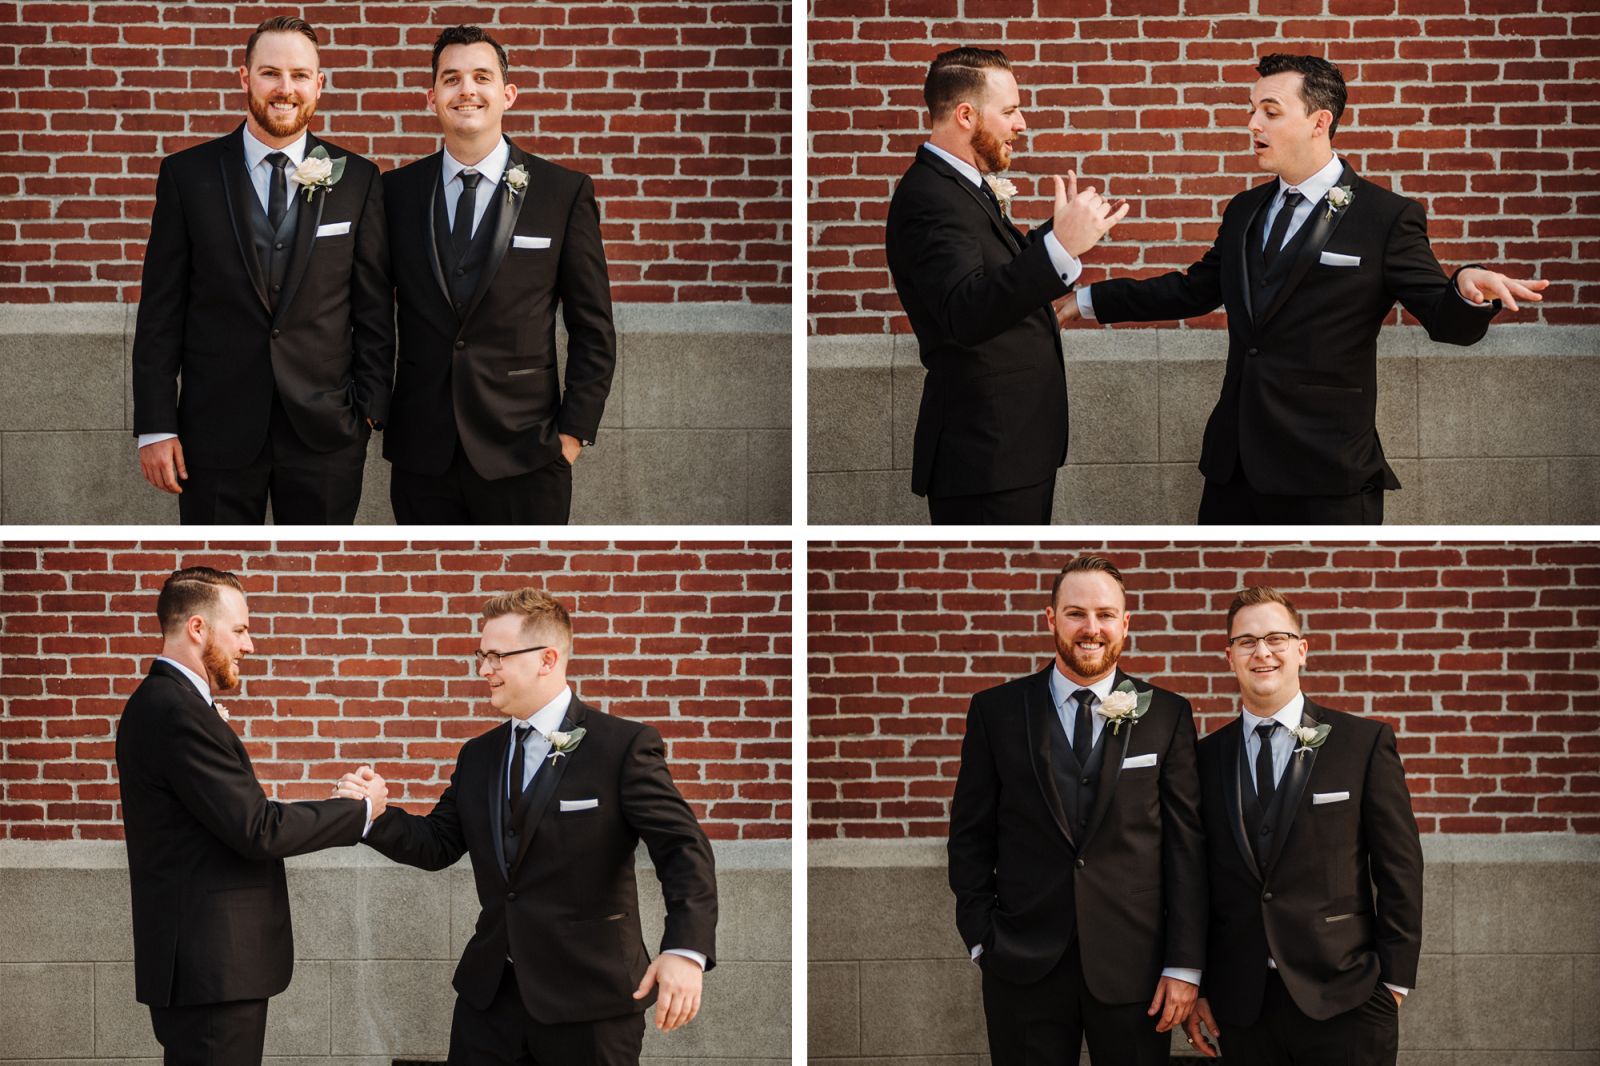 individual portraits of the groom with each groomsman wedding photography guide